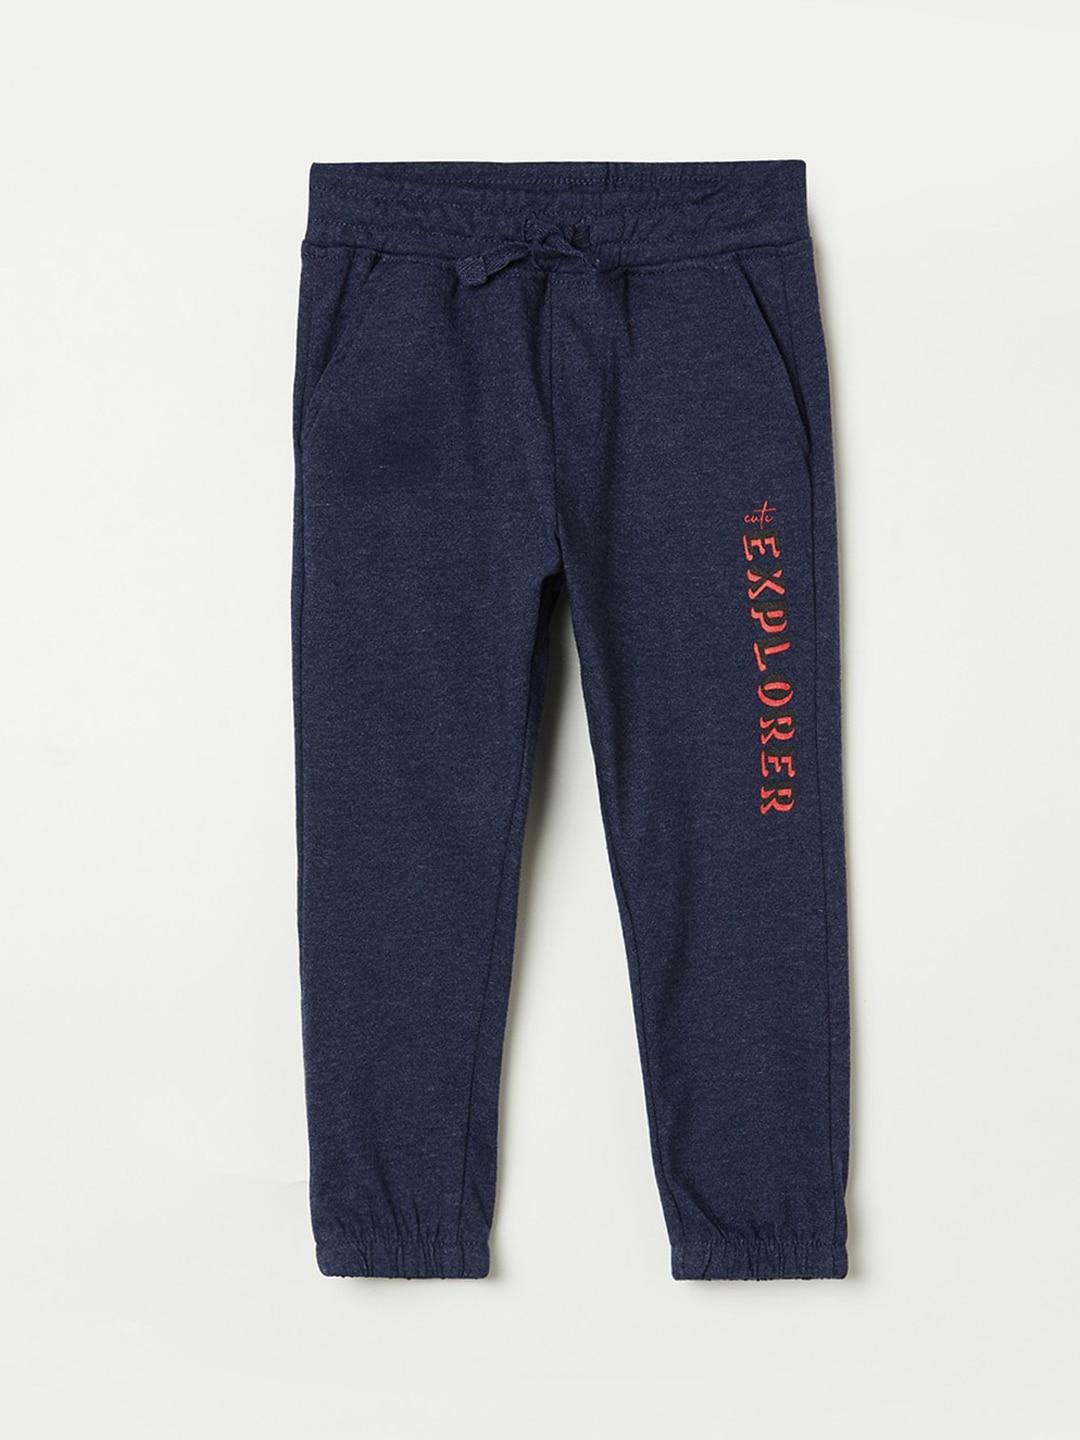 Juniors by Lifestyle Boys Navy Blue Solid Track Pants